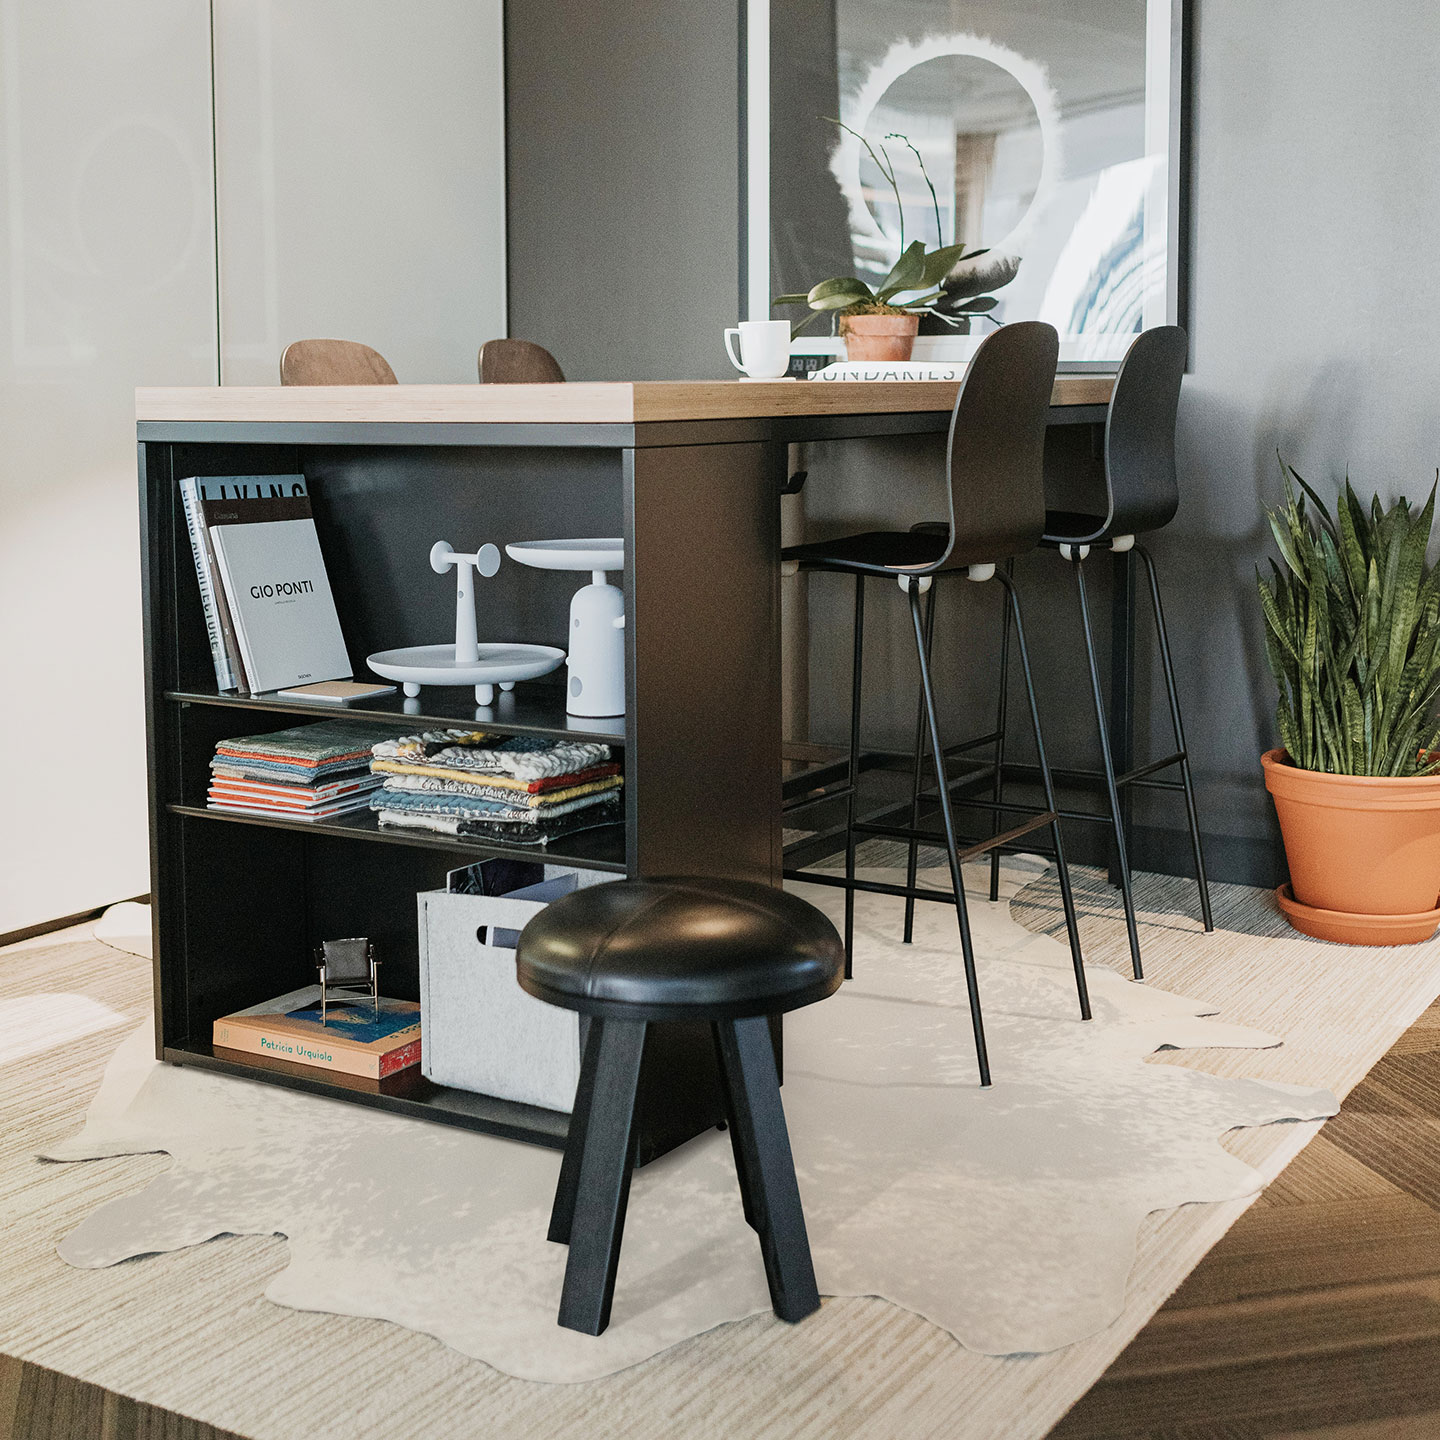 Haworth BuzziMilk stool in black leather and wood in an open space